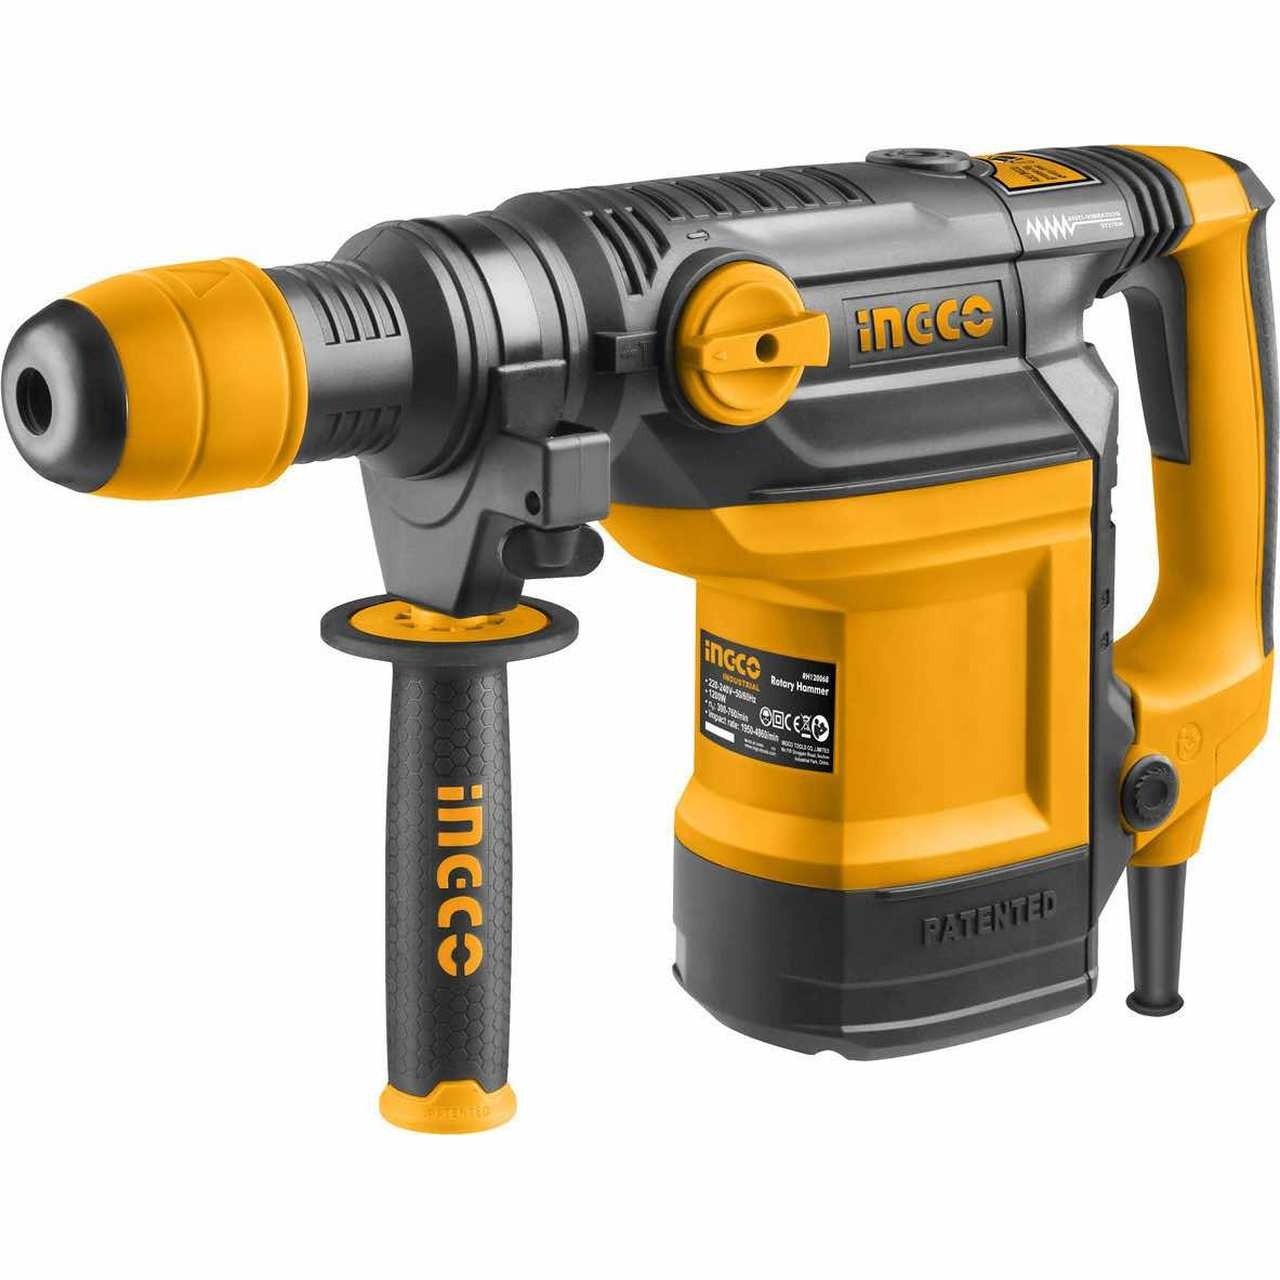 Ingco SDS Max Rotary Hammer Drill 1200W 38mm - RH120068 | Supply Master | Accra, Ghana Tools Building Steel Engineering Hardware tool